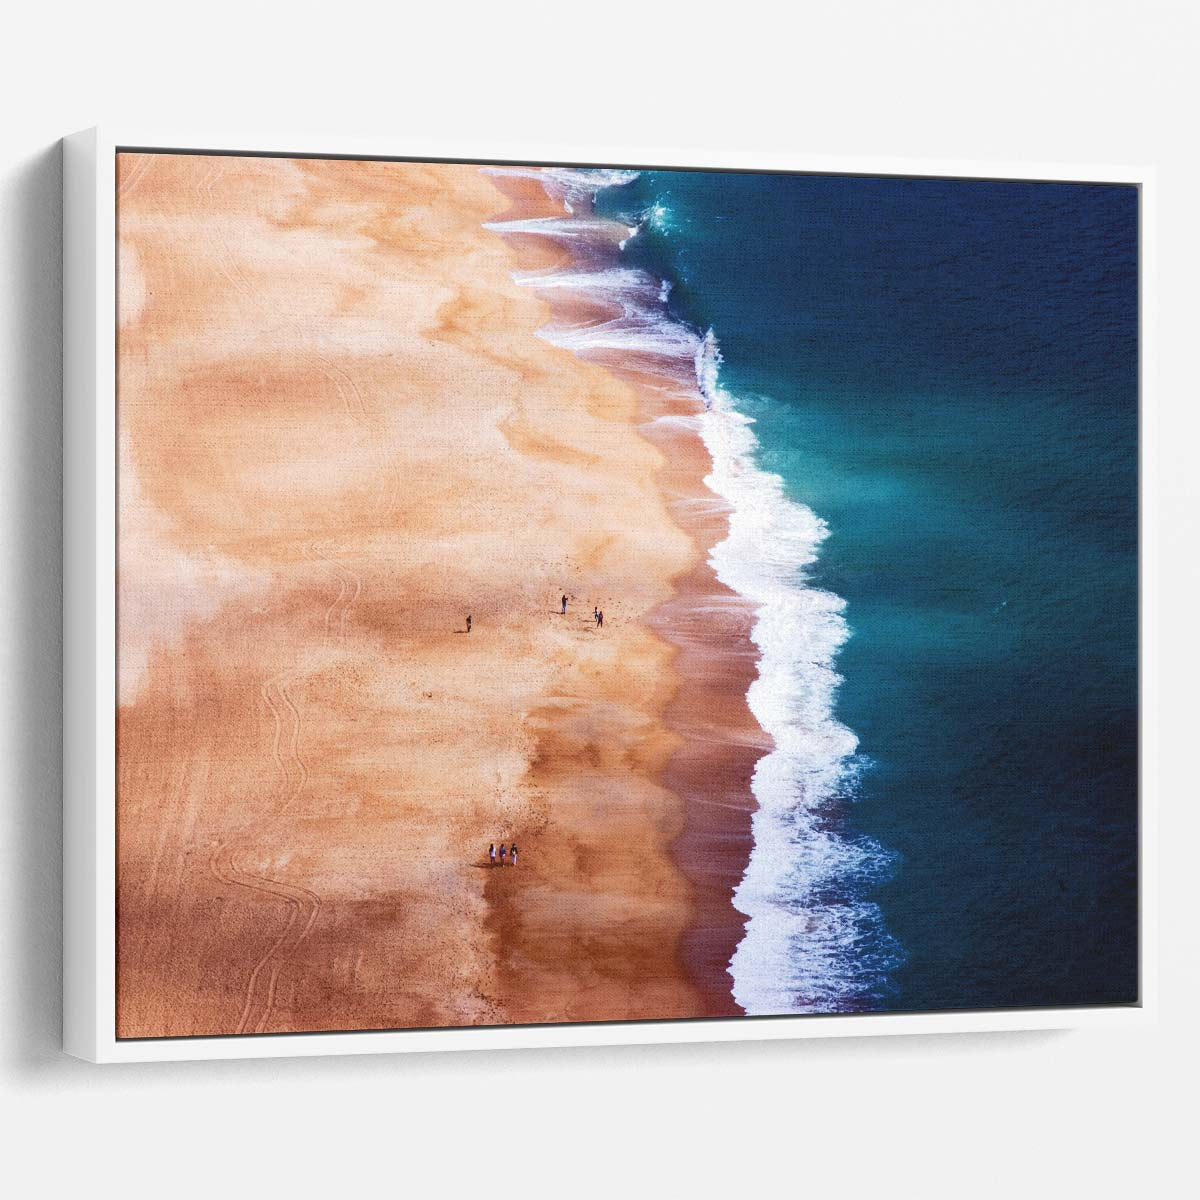 Silver Coast Portugal Aerial Seascape Beach Wall Art by Luxuriance Designs. Made in USA.